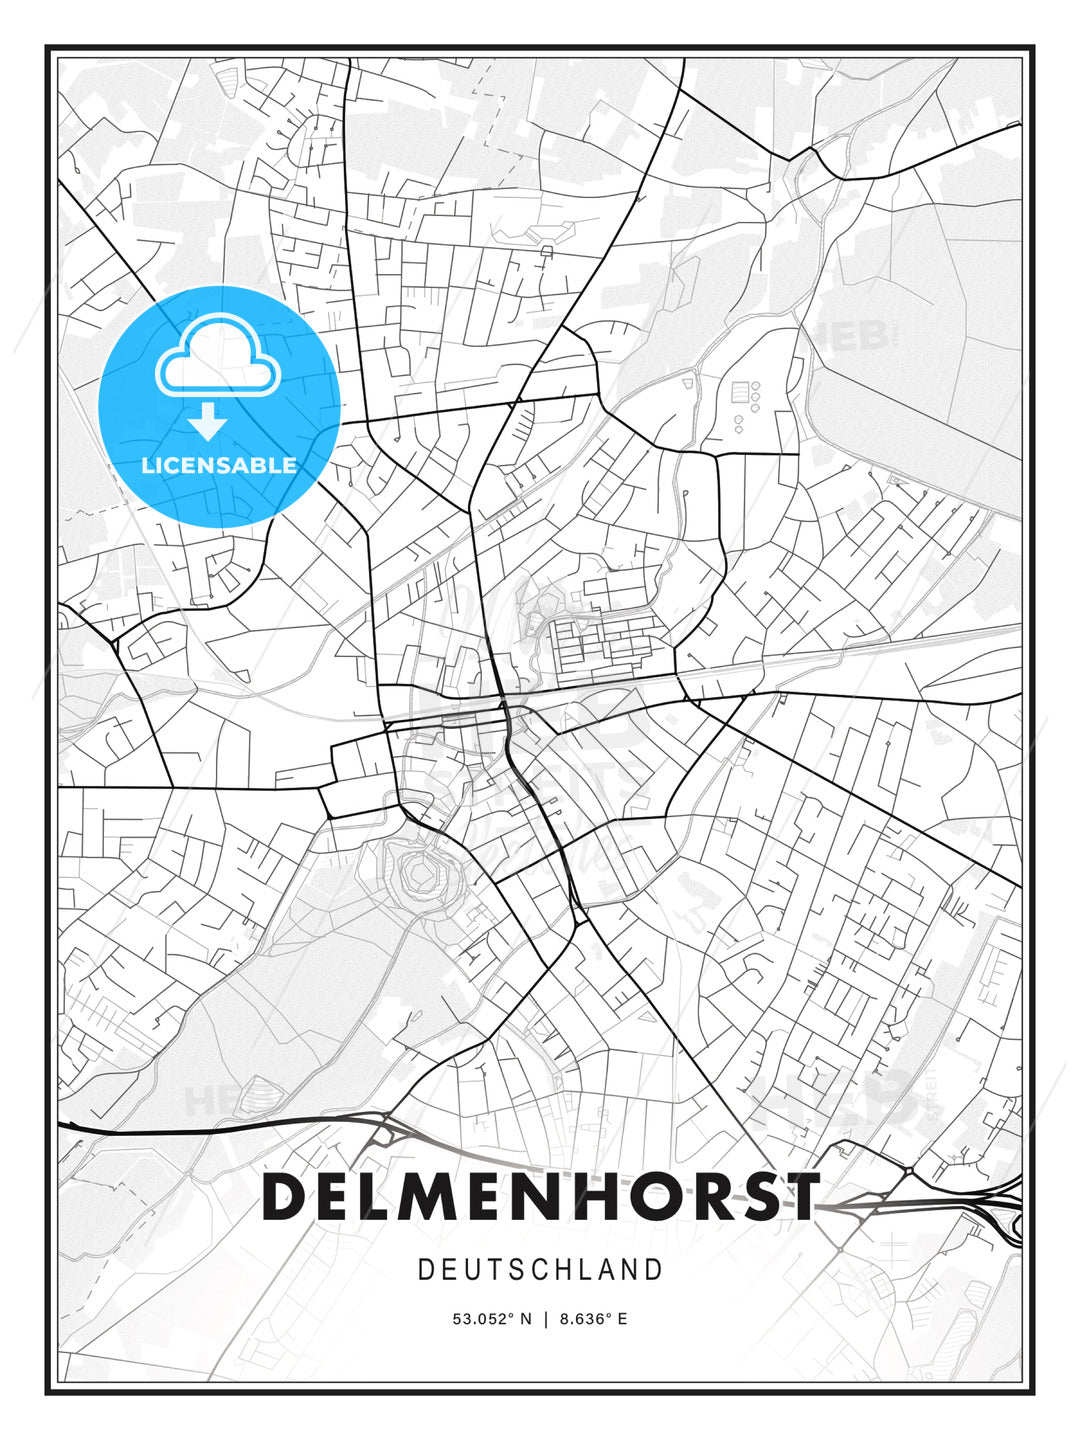 Delmenhorst, Germany, Modern Print Template in Various Formats - HEBSTREITS Sketches